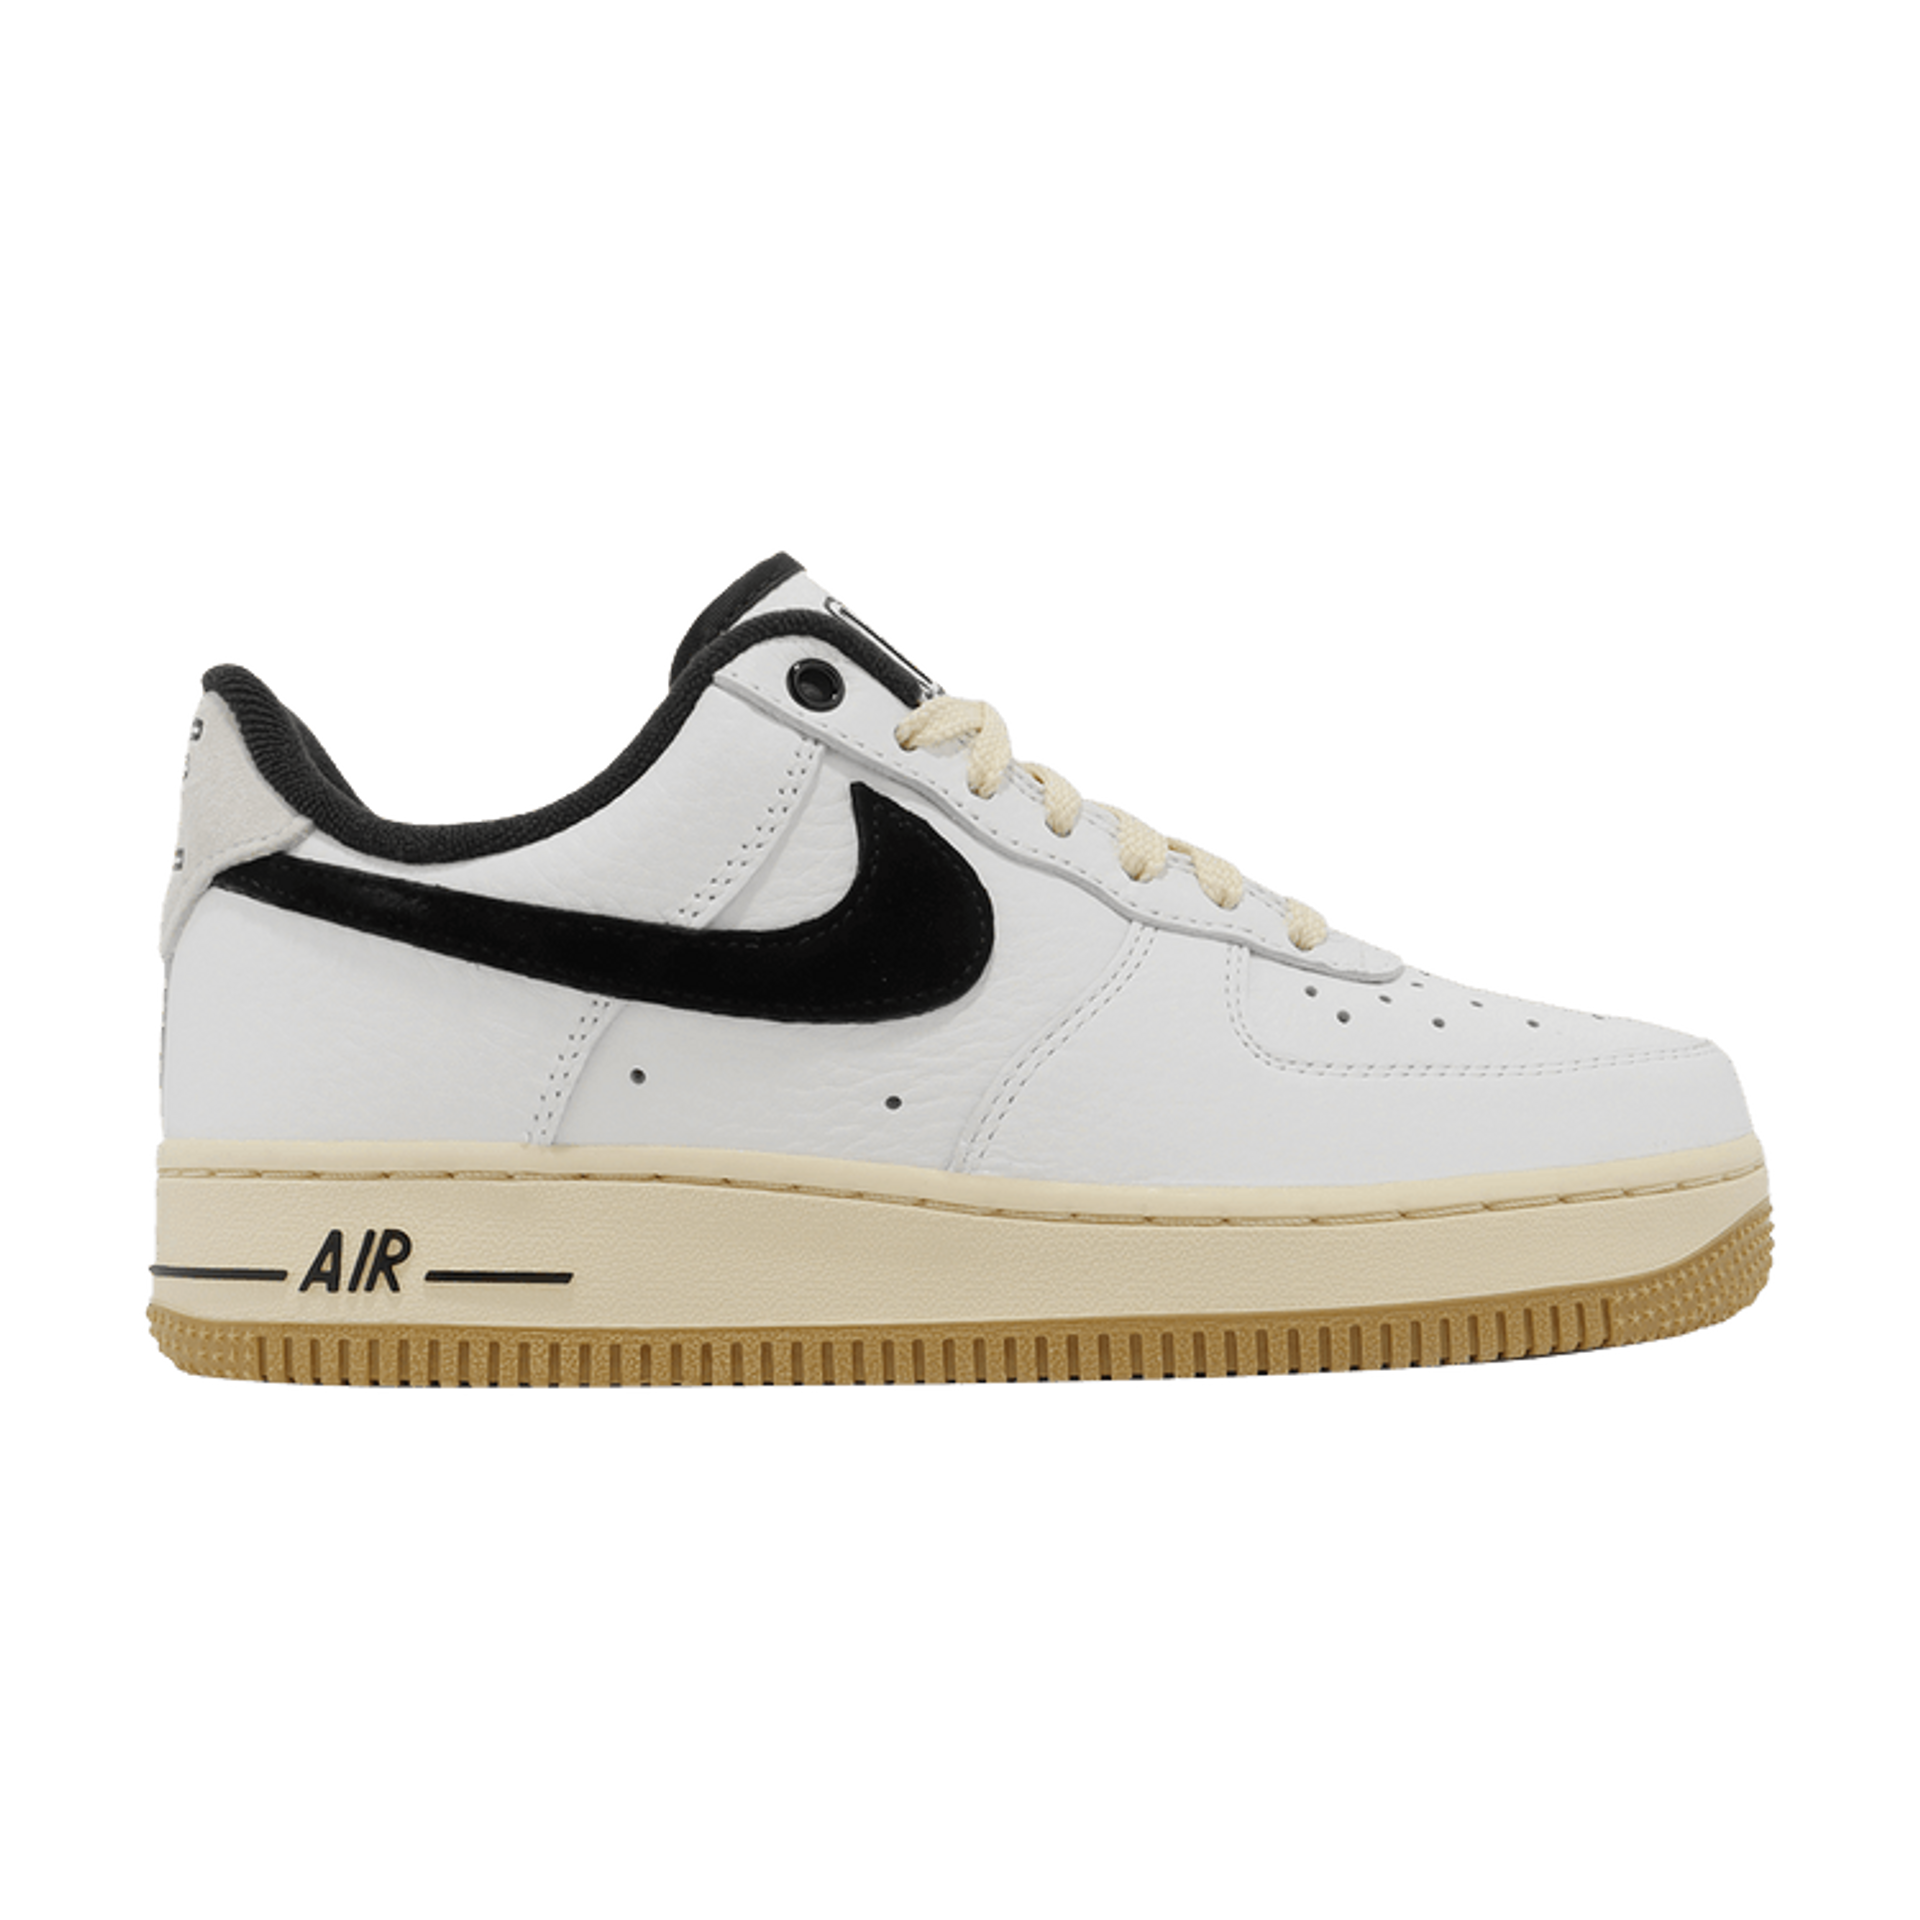 Nike Wmns Air Force 1 '07 'Command Force - White Black'